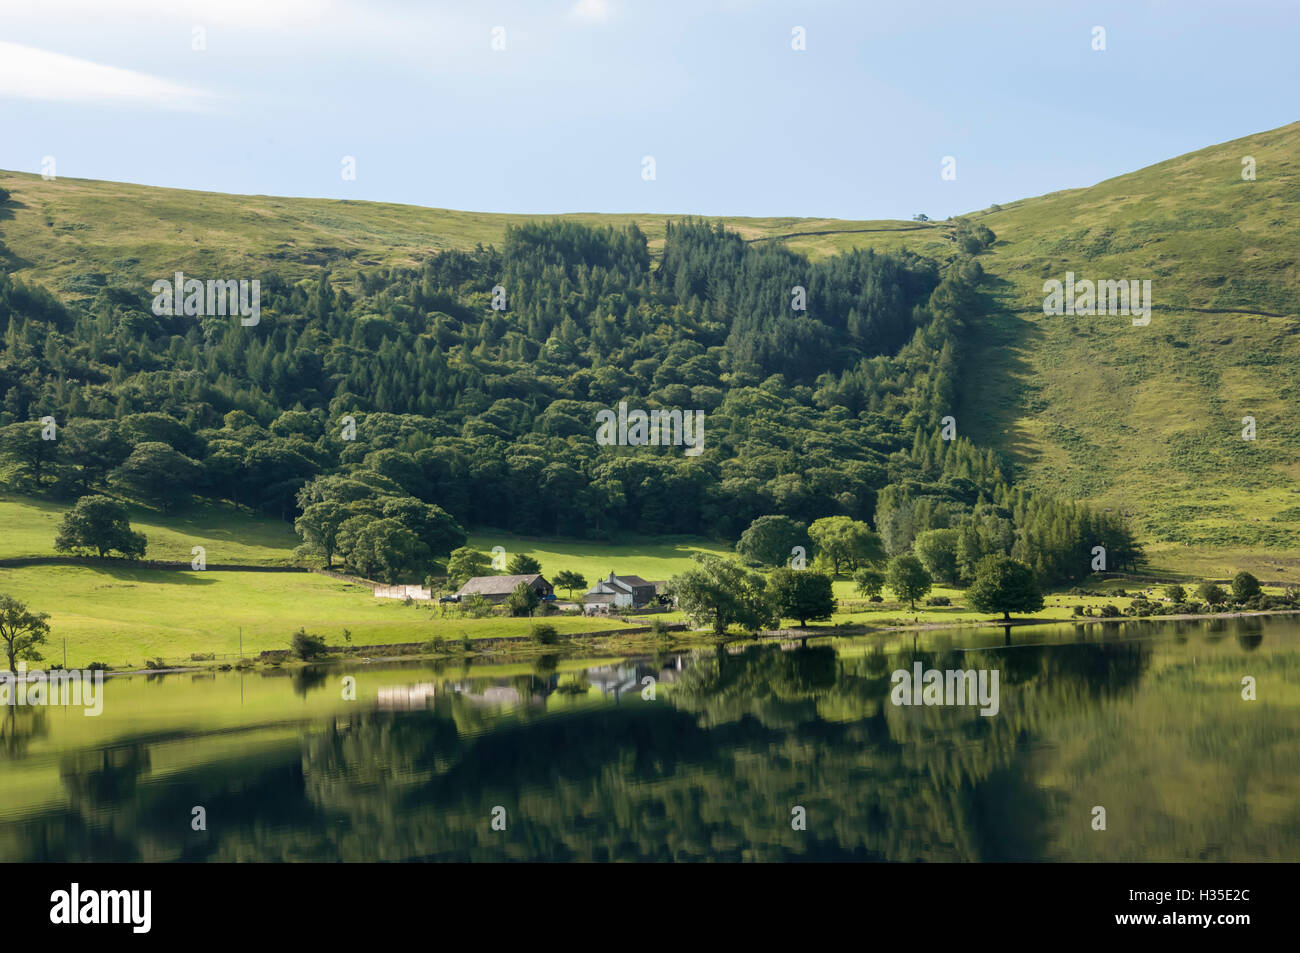 Lakeland Farm by Wastwater, early morning, Wasdale, Lake District National Park, Cumbria, England, UK Stock Photo